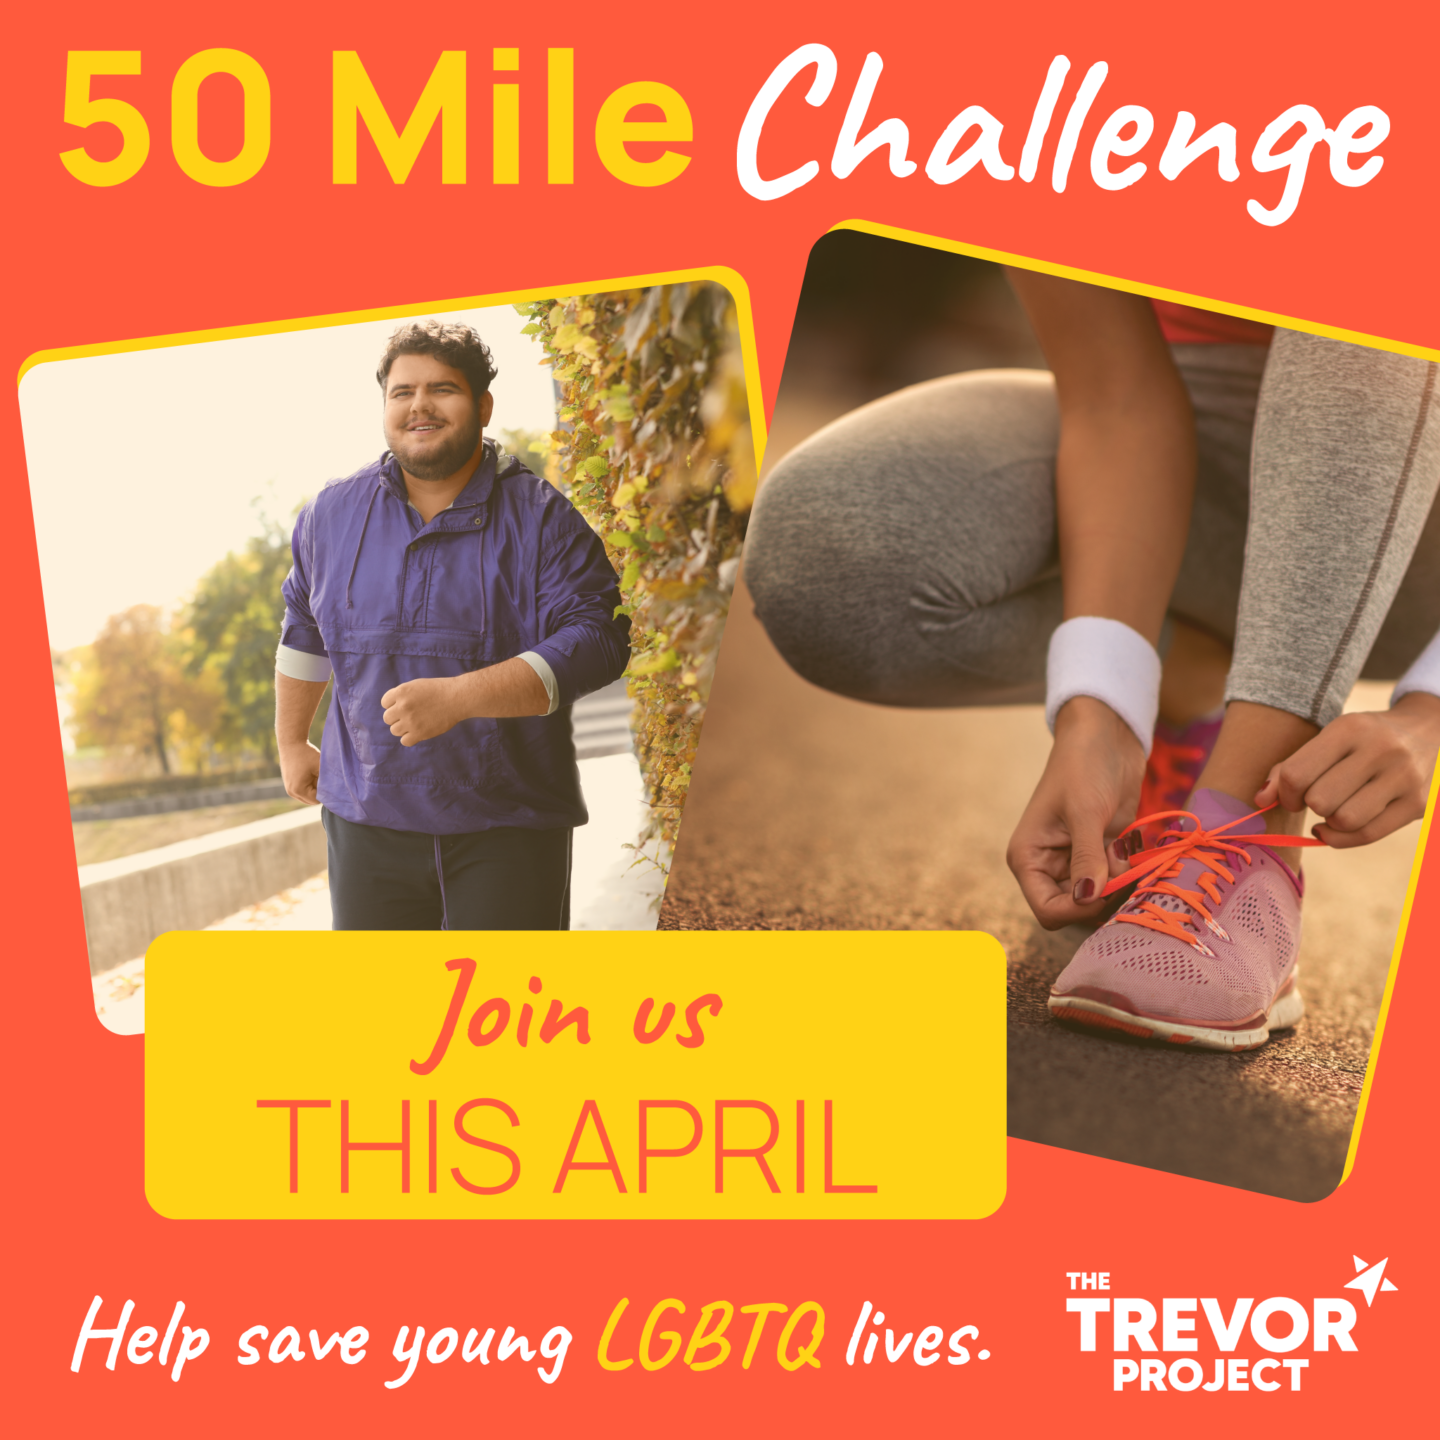 50 mile challenge. Join us this April